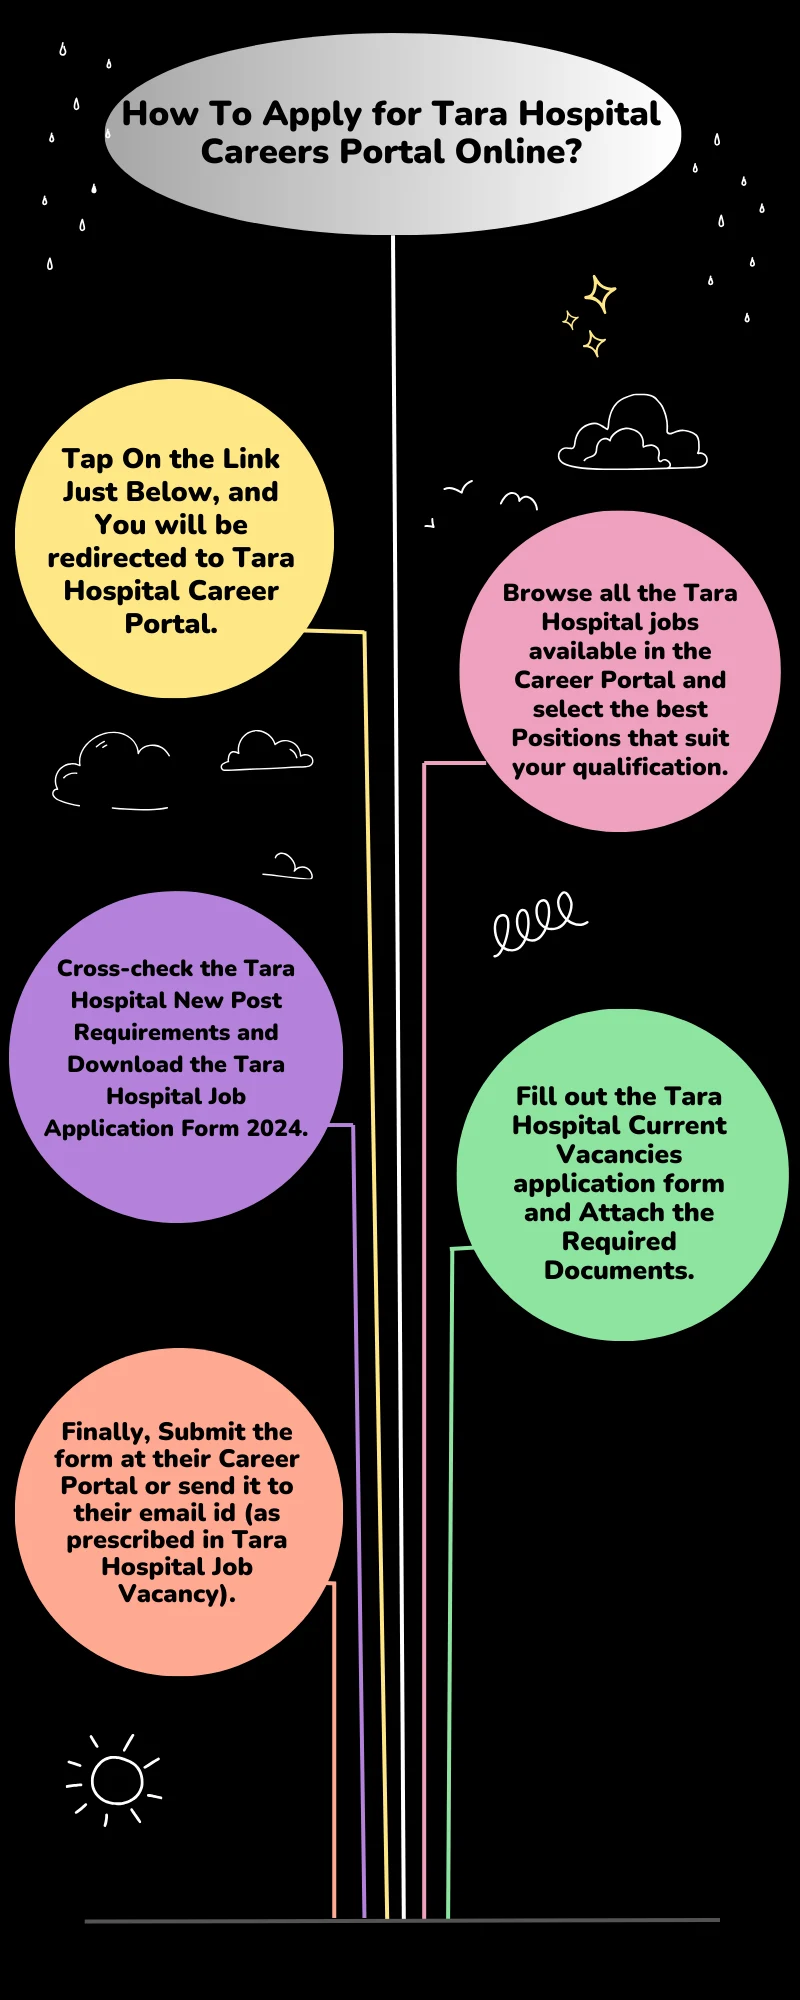 How To Apply for Tara Hospital Careers Portal Online?